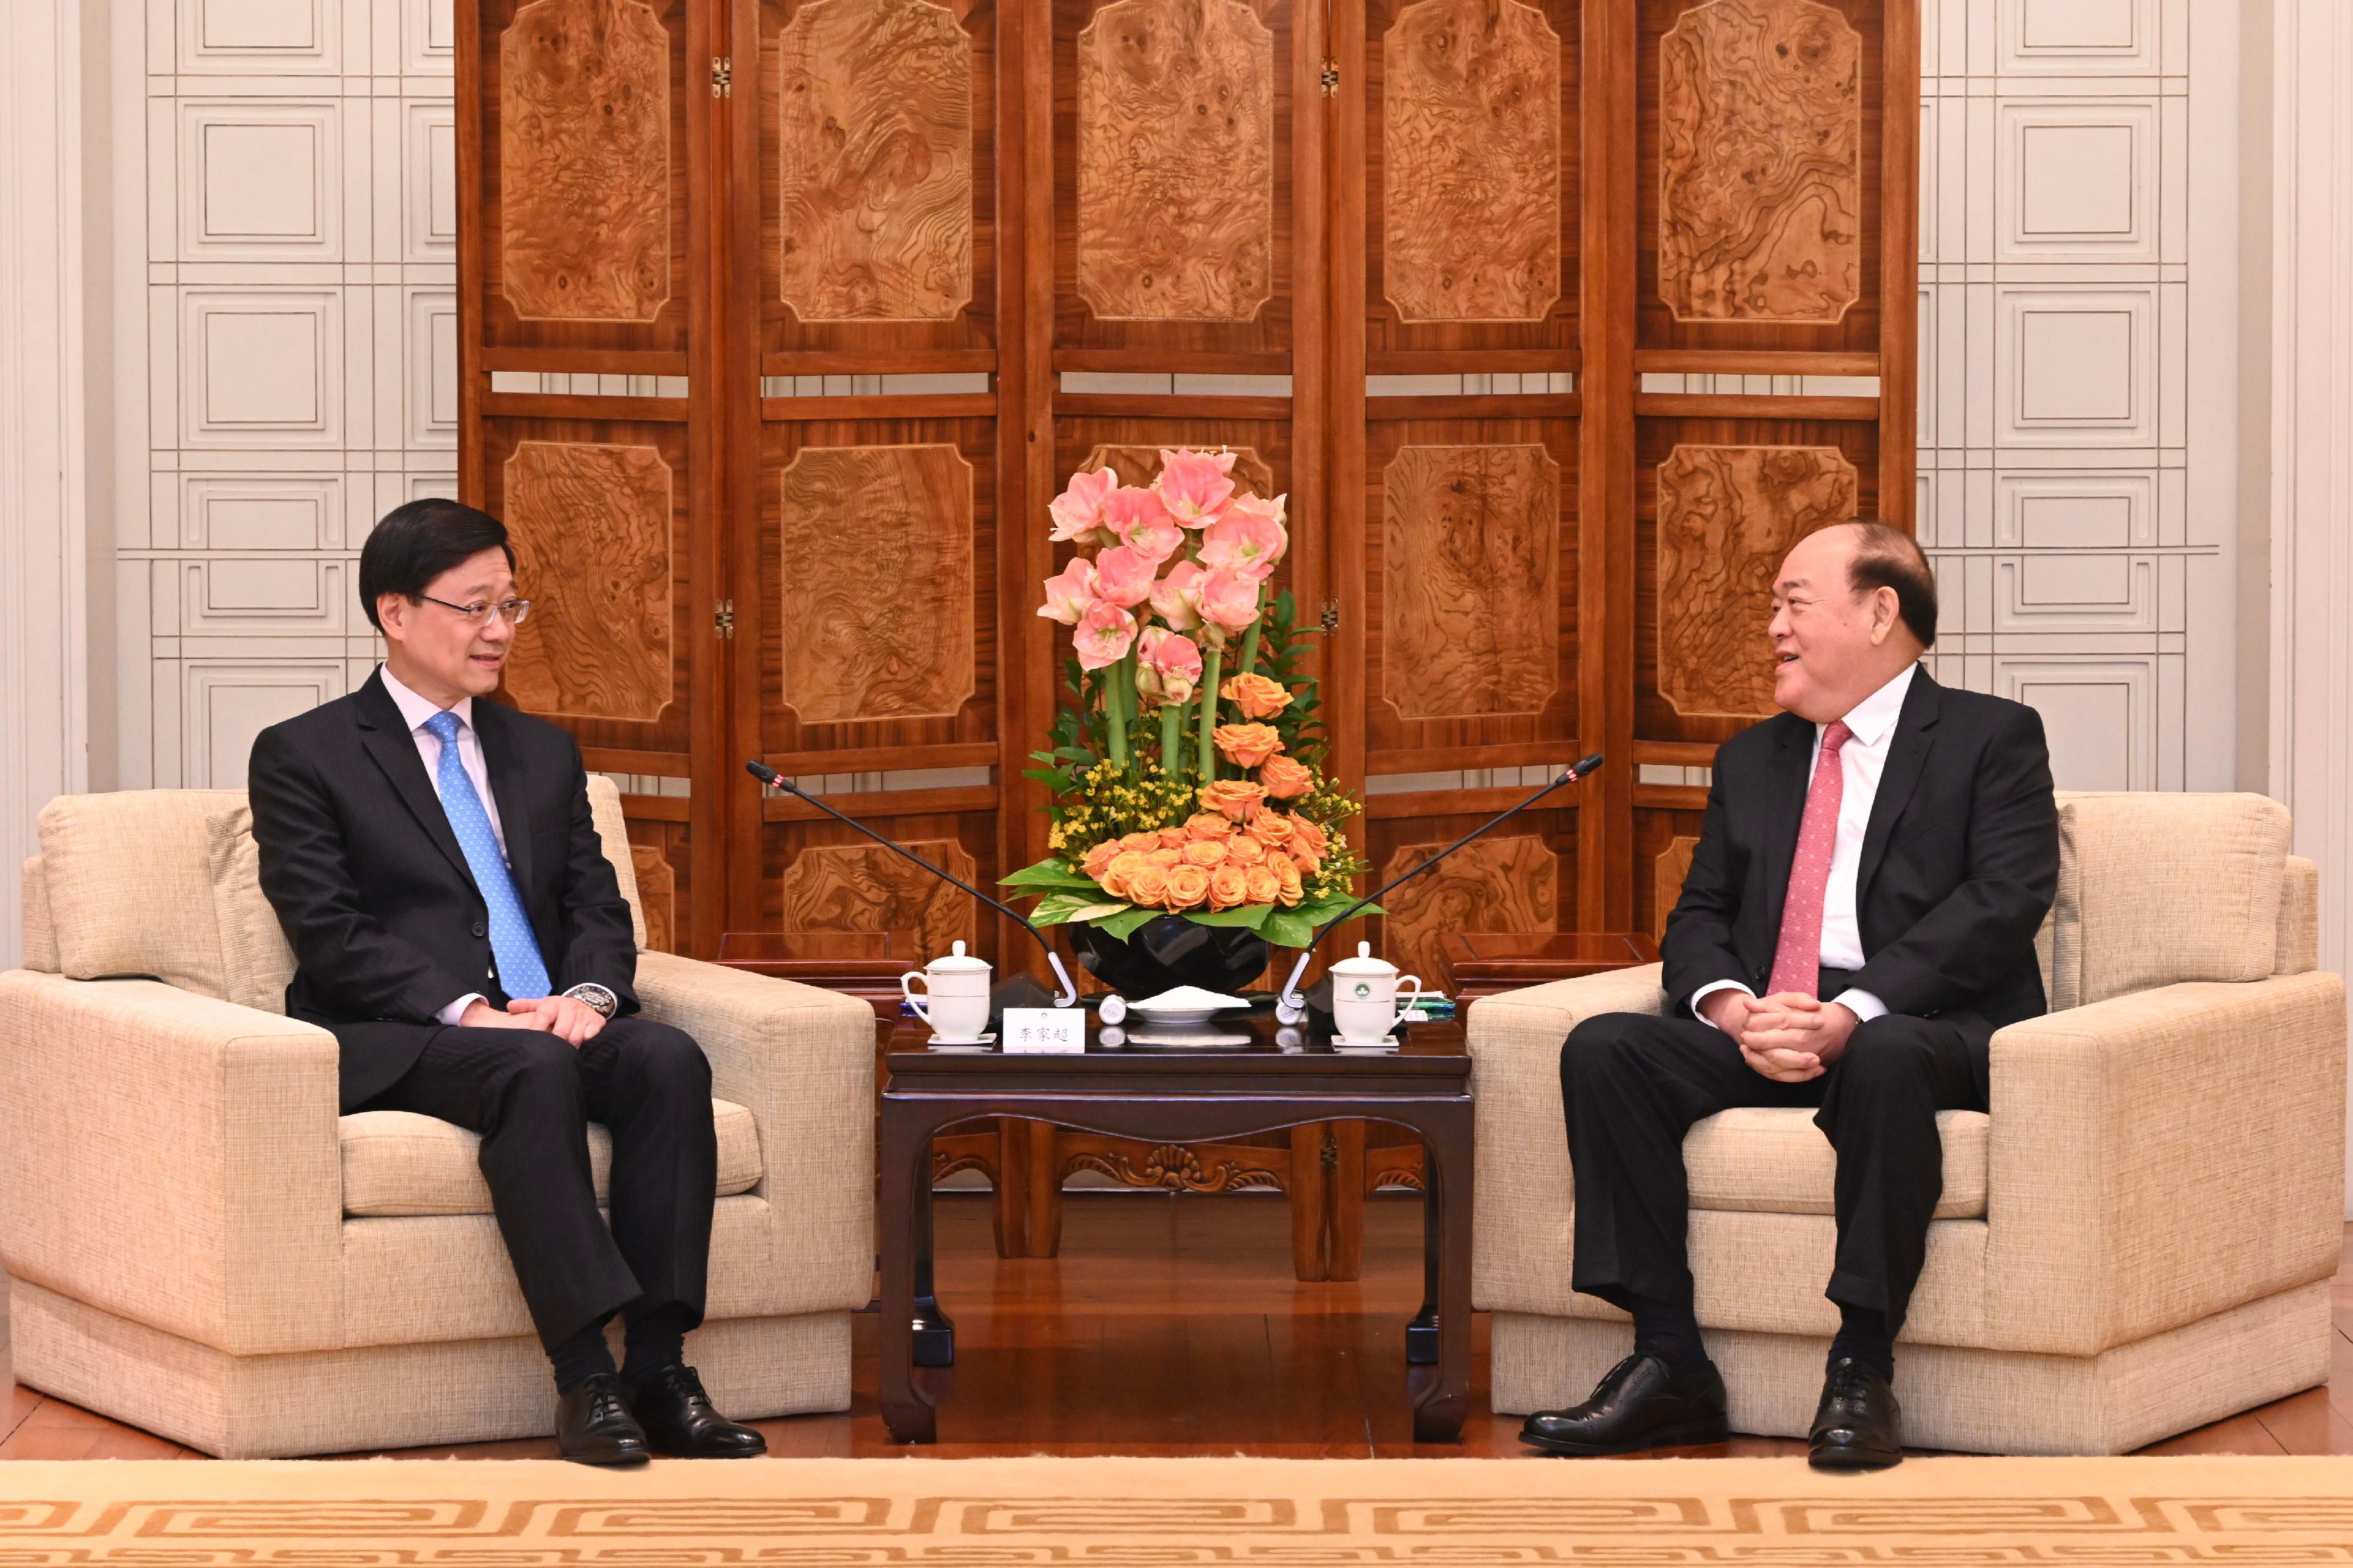 The Chief Executive, Mr John Lee, led a delegation to visit Macao today (March 2). Photo shows Mr Lee (left) meeting the Chief Executive of the Macao Special Administrative Region, Mr Ho Iat-seng (right).